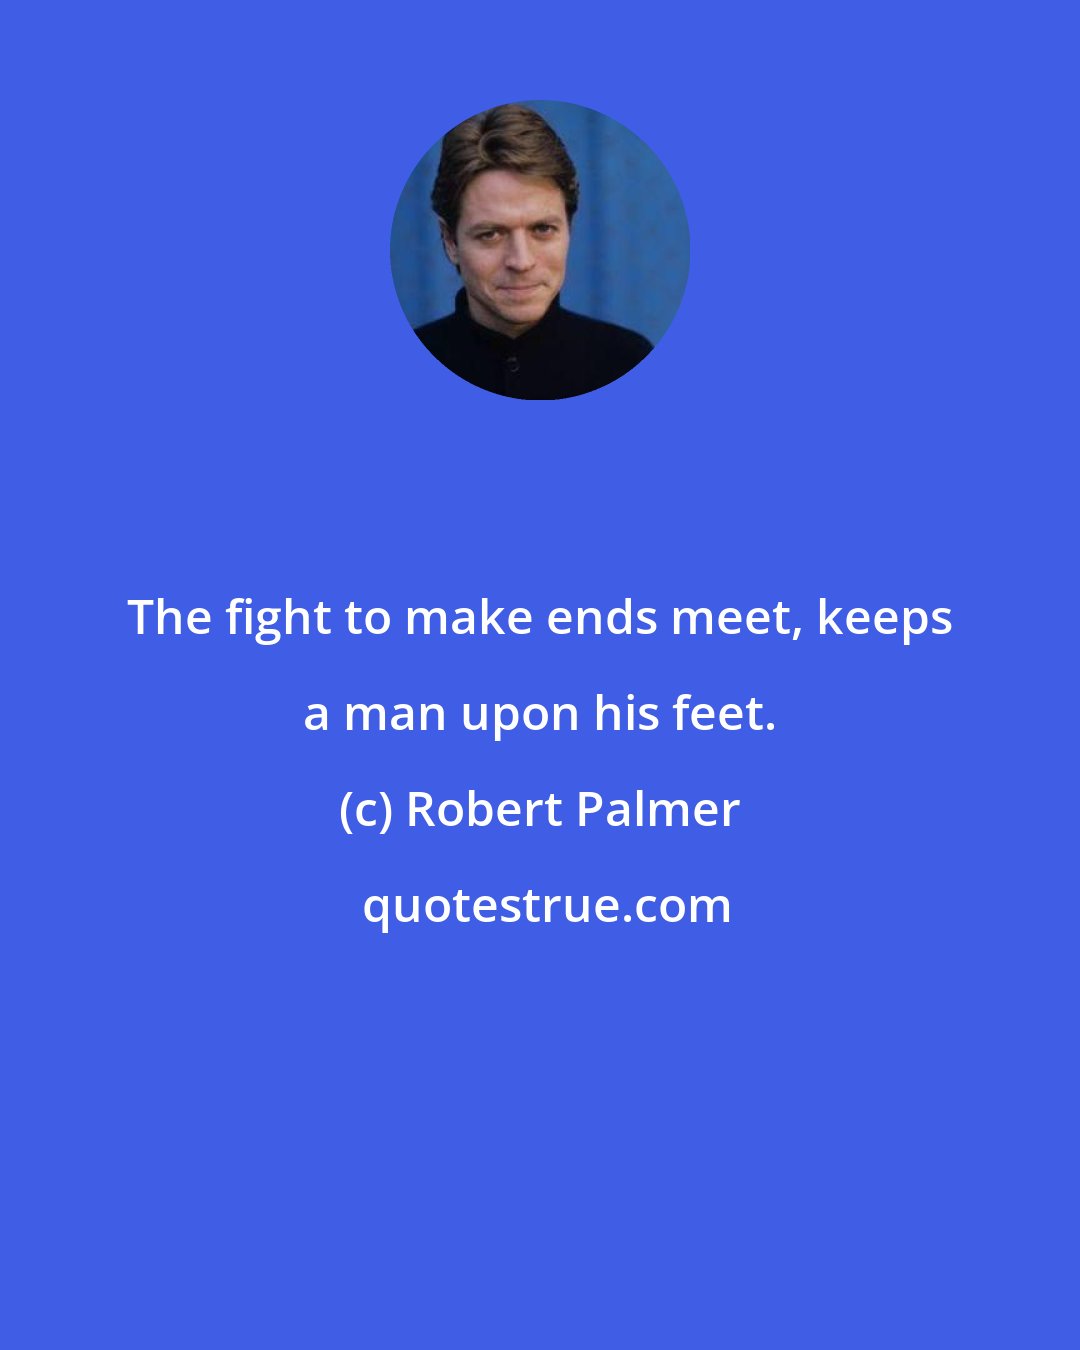 Robert Palmer: The fight to make ends meet, keeps a man upon his feet.